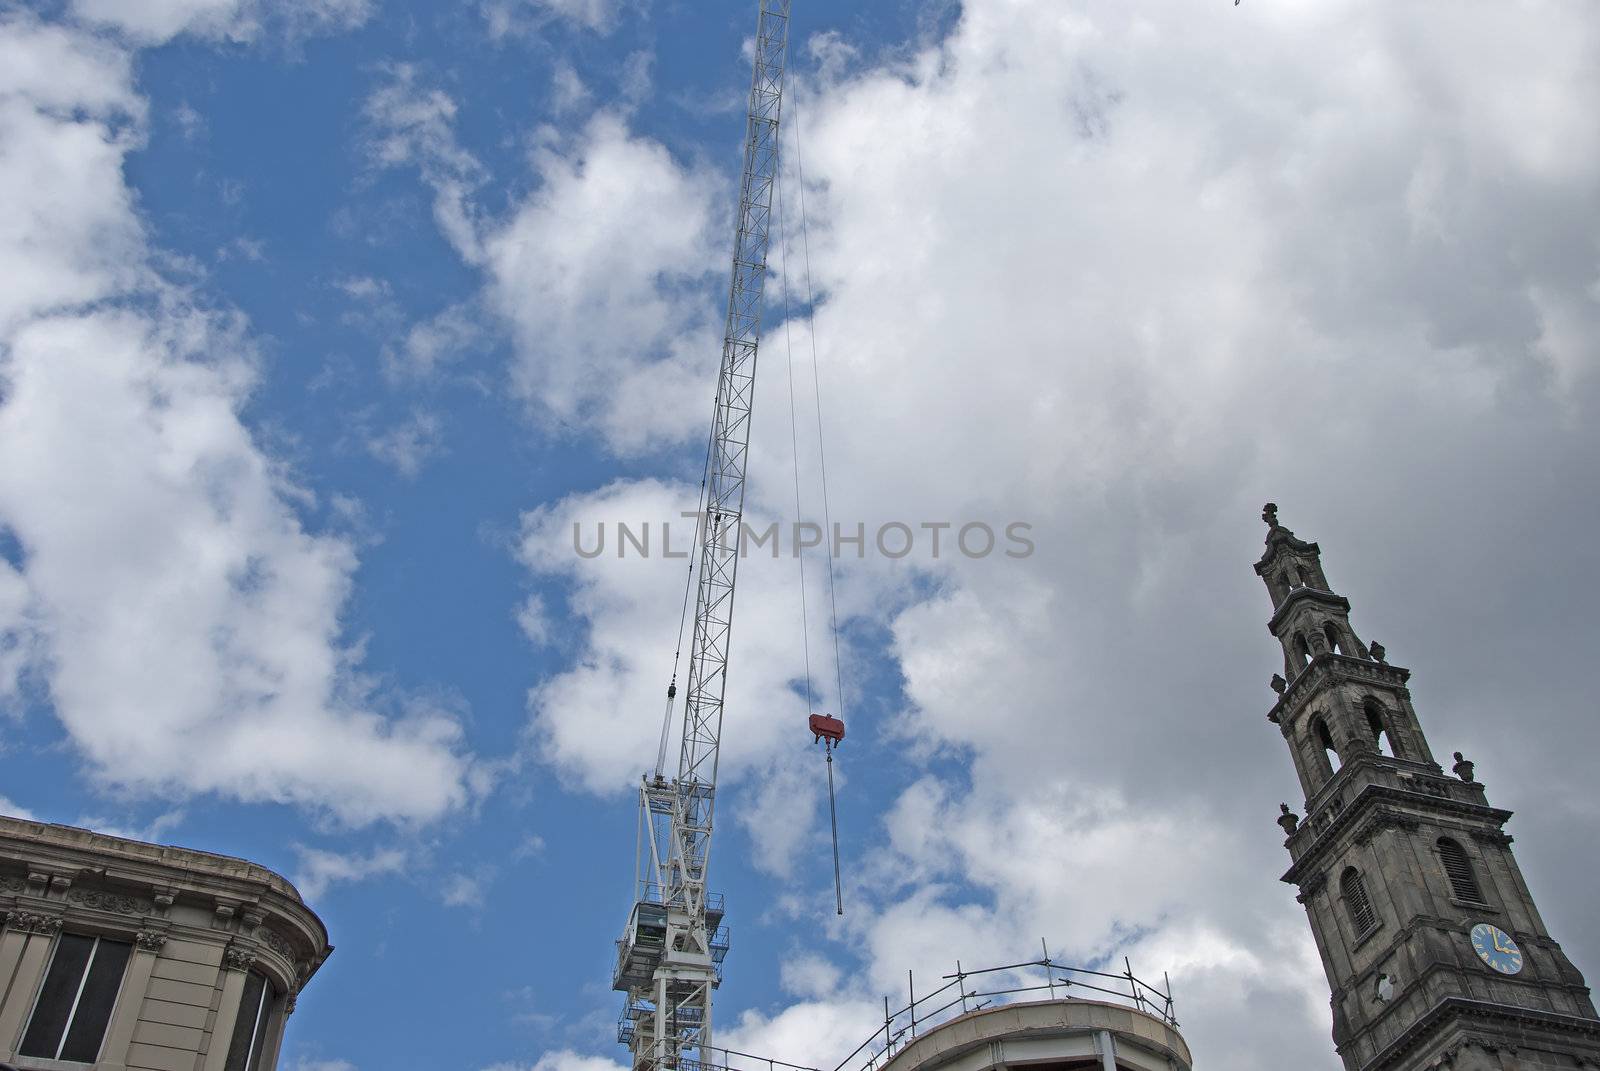 Clocktower and White Heavy Lift Crane by d40xboy